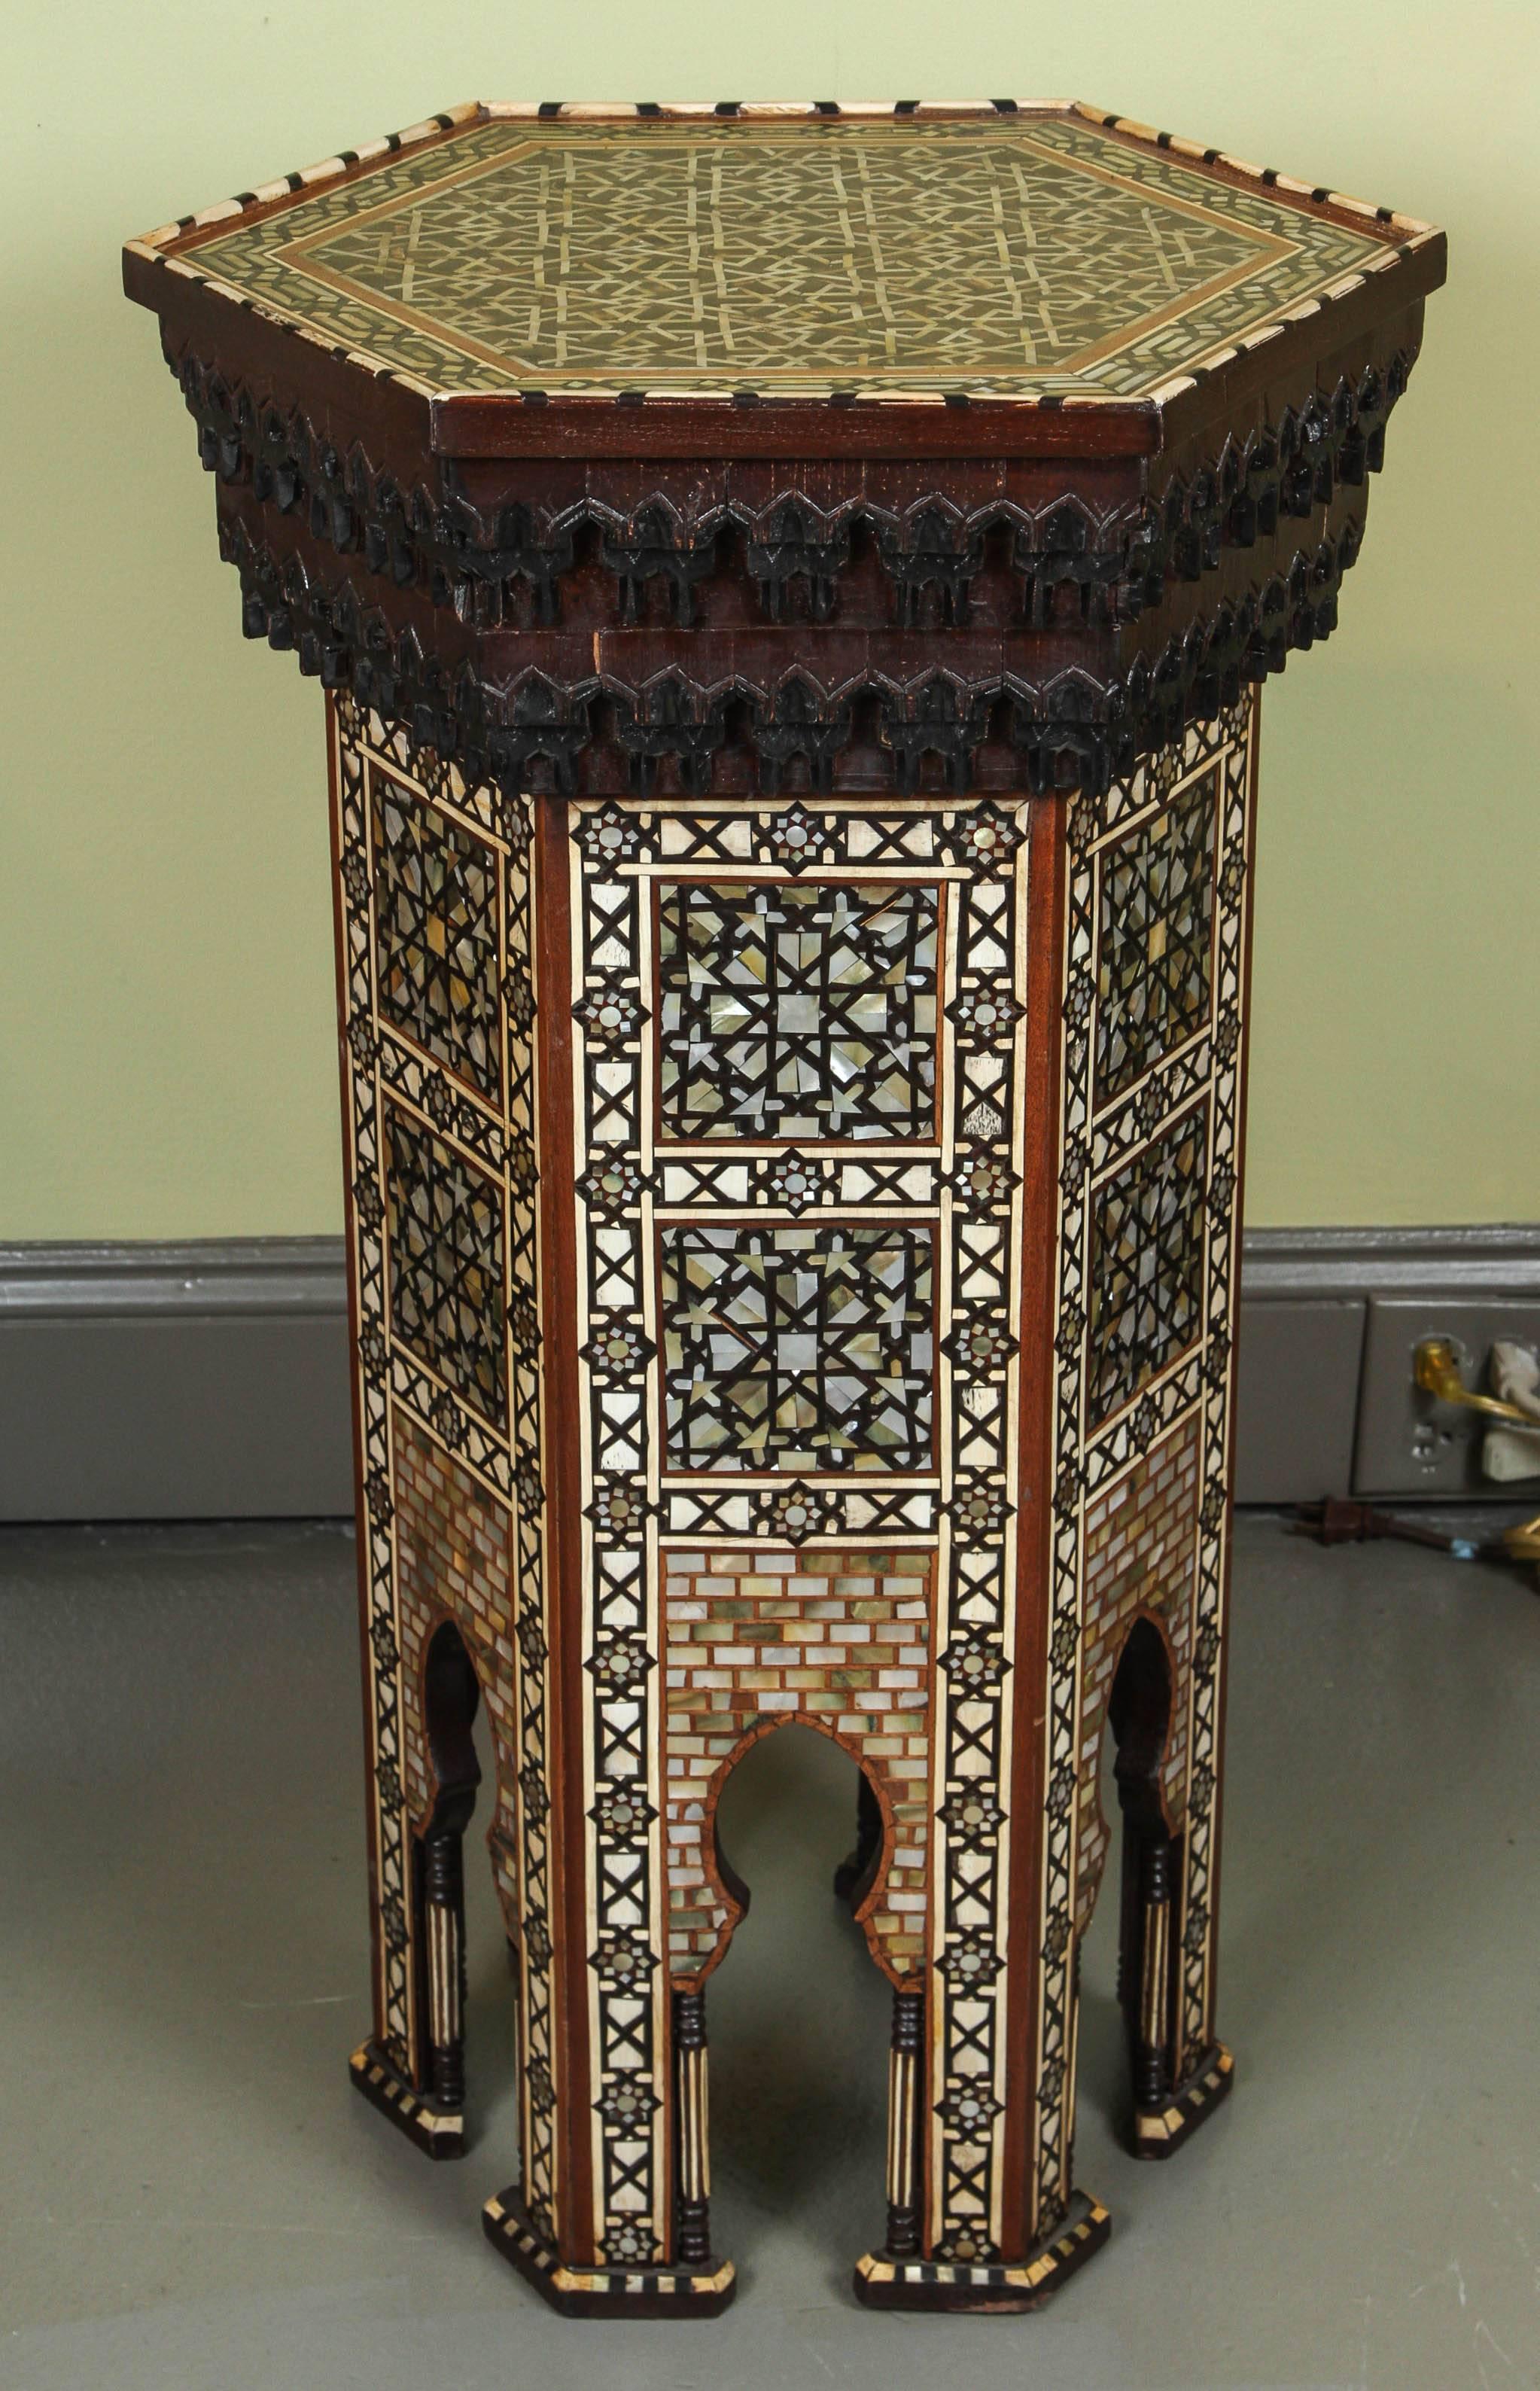 A fine pair of Moorish mother-of-pearl inlaid hexagonal stands.